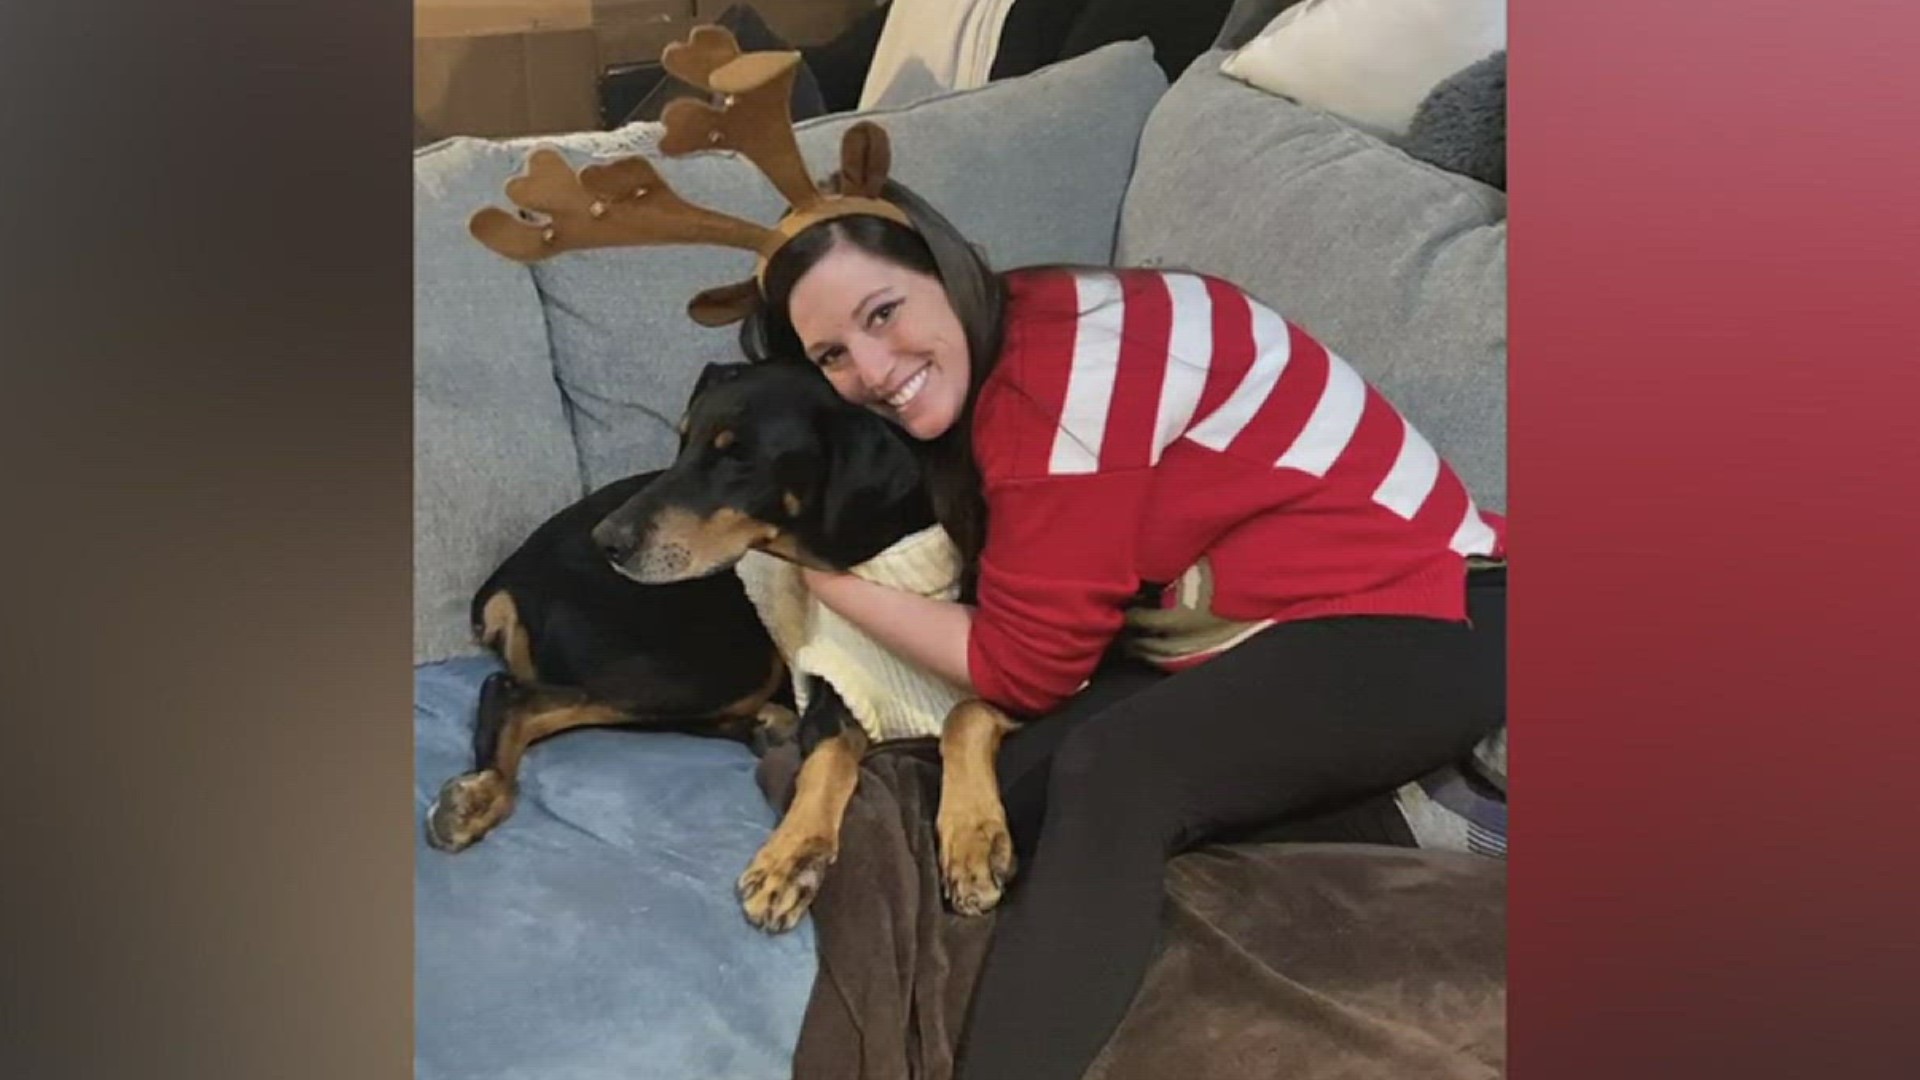 Ashley Vuxta of Dauphin County goes above and beyond to help dogs at the Doberman Pinscher Rescue of Pennsylvania.